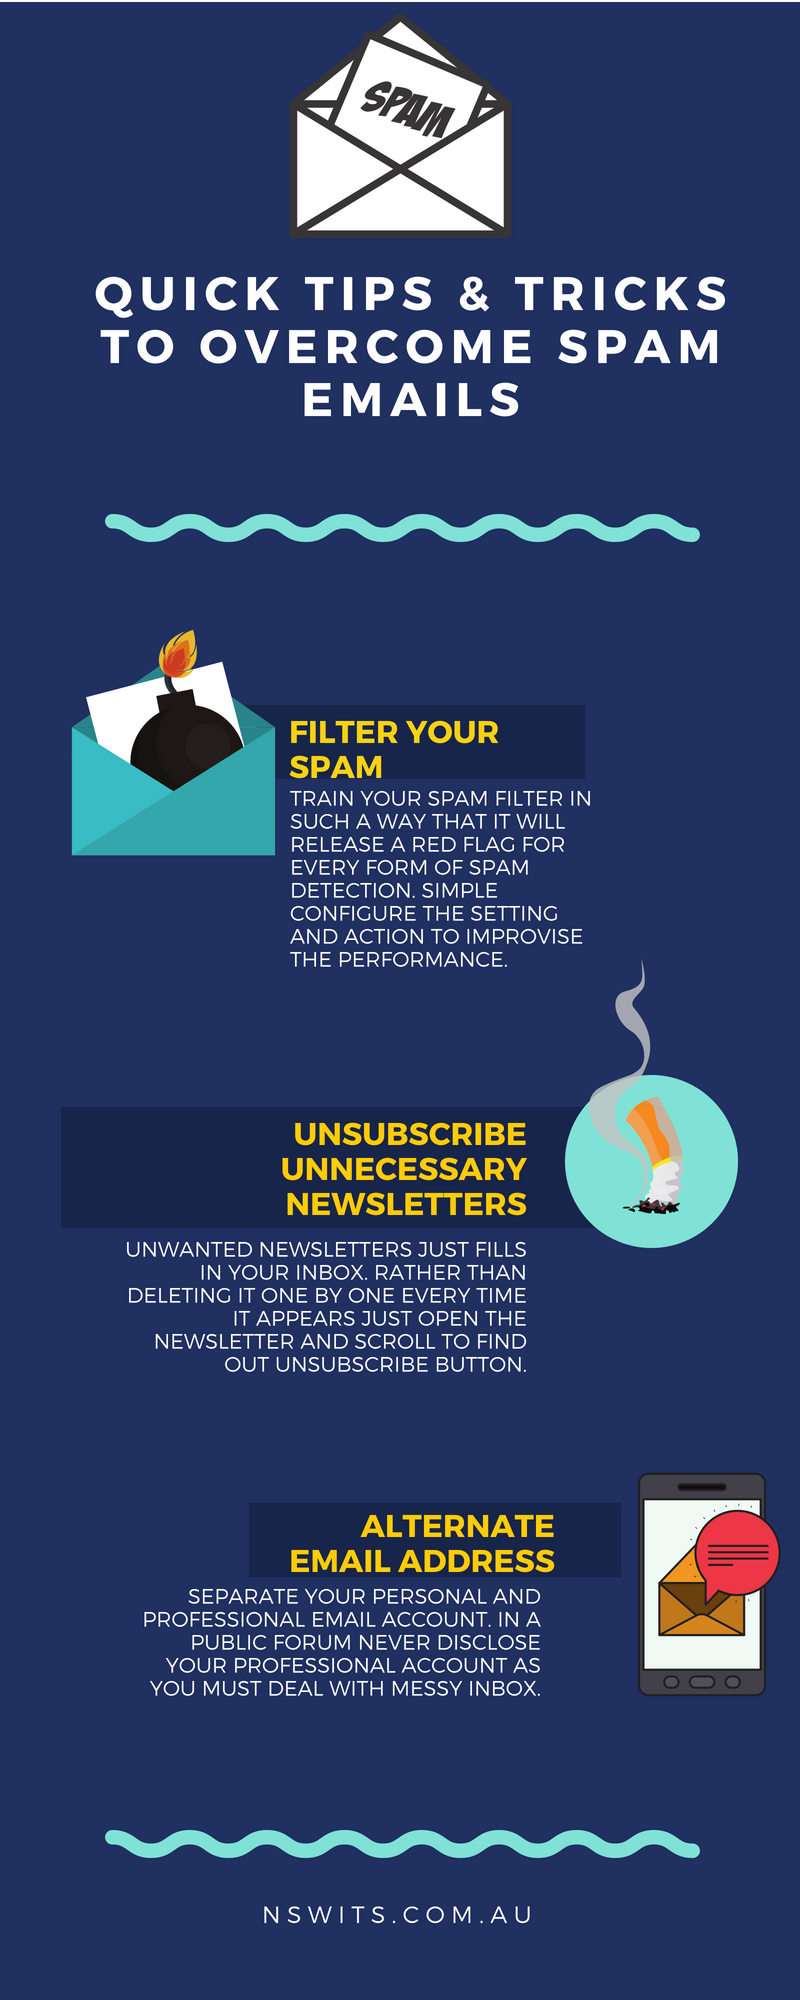 Quick Tips & Tricks to Overcome Spam Emails